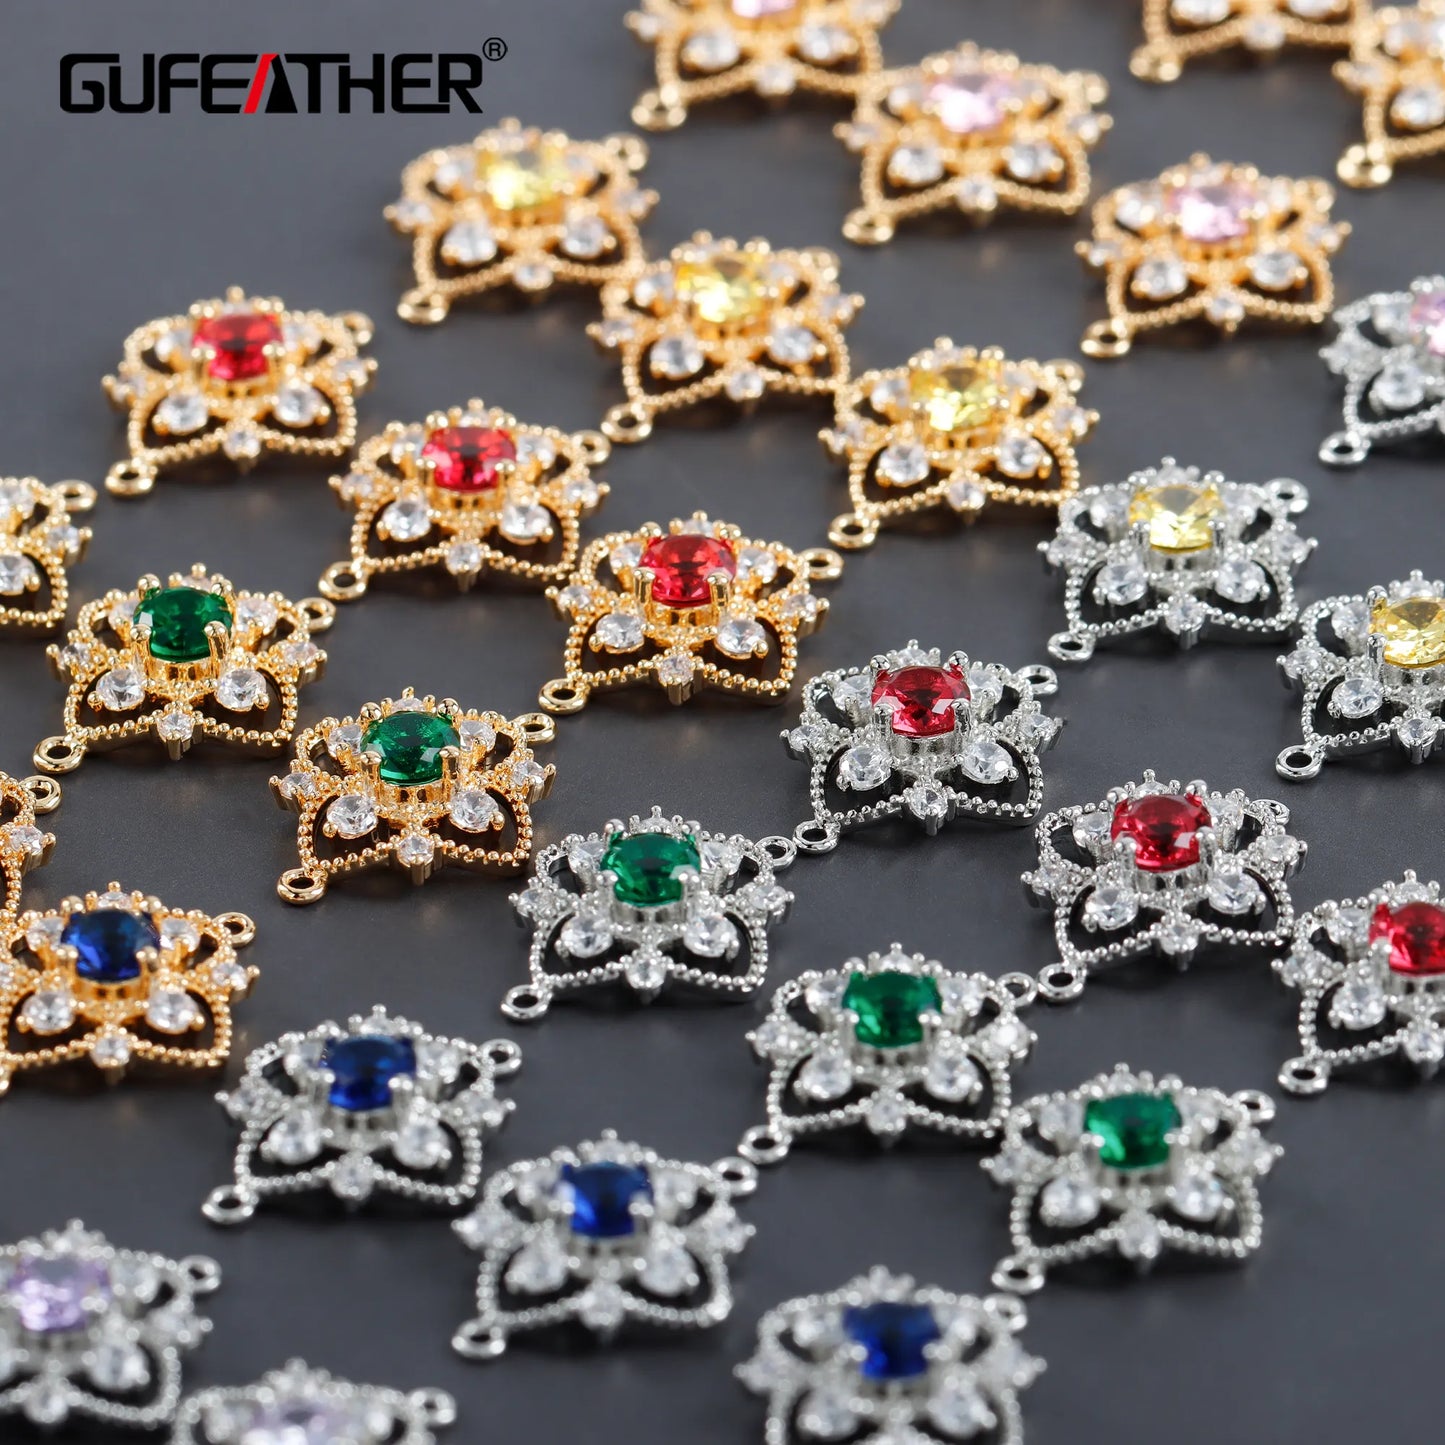 GUFEATHER M1030,jewelry accessories,pass REACH,nickel free,18k gold rhodium plated,copper,zircons,diy jewelry making,10pcs/lot